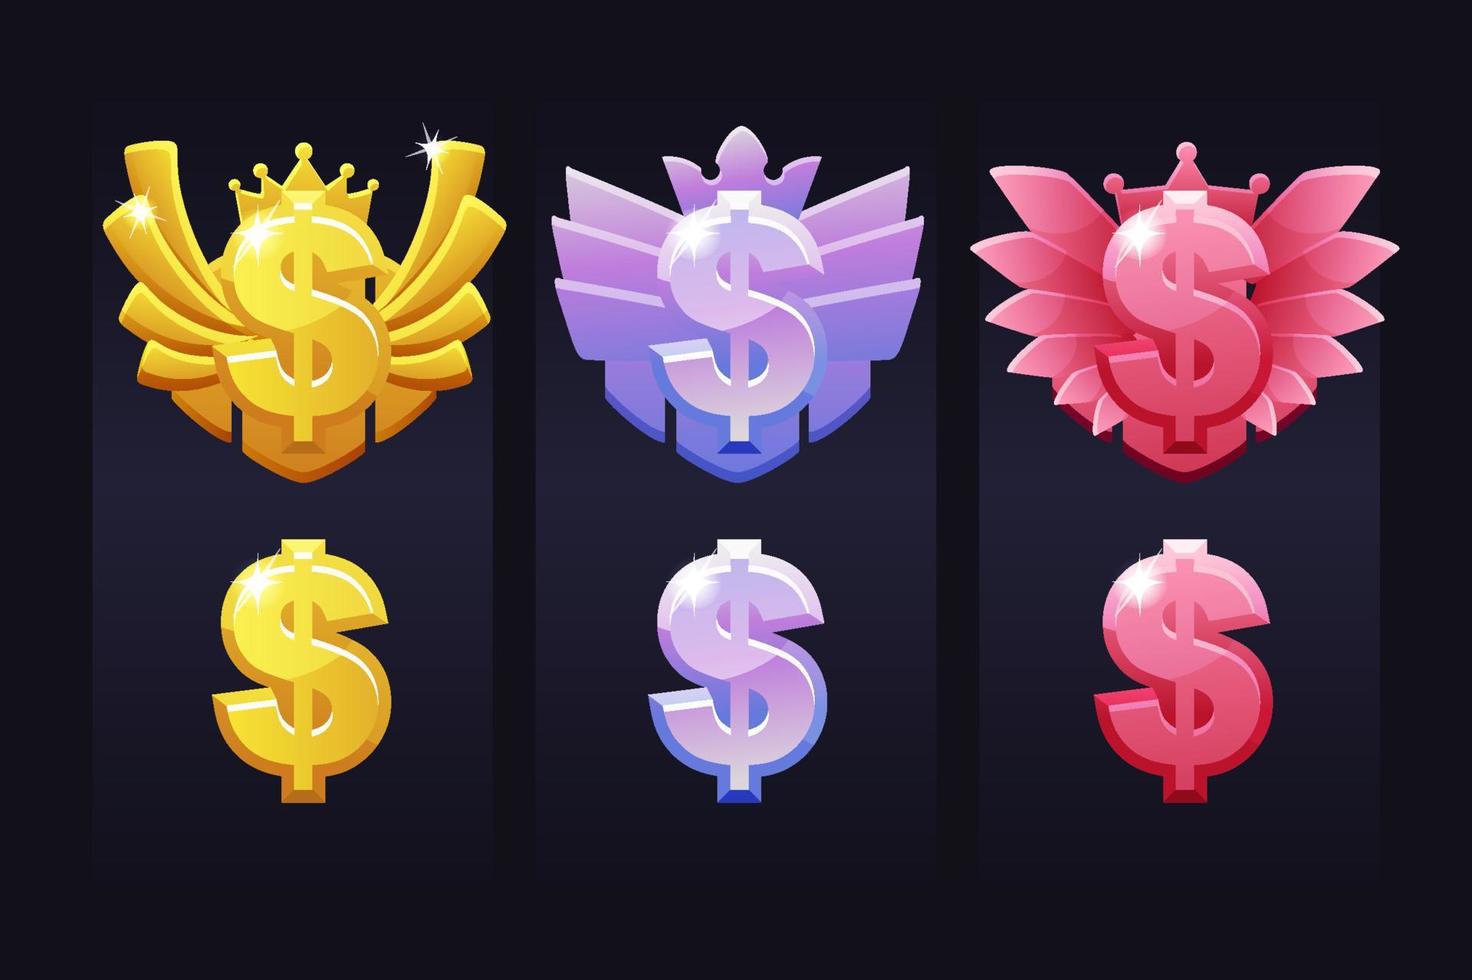 Achievement dollar sign for the game, award emblems for winner. Vector illustration set money in currency icons for graphic design.